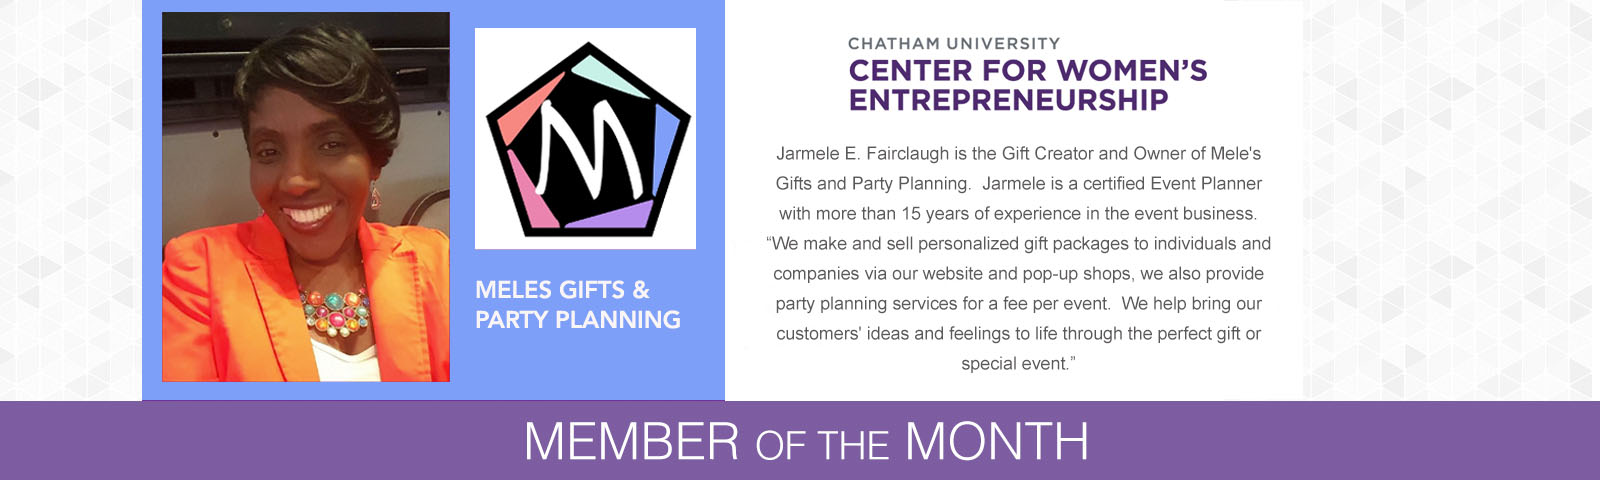 Jarmele E. Fairclaugh is the Gift Creator and Owner of Mele's Gifts and Party Planning.  Jarmele is a certified Event Planner with more than 15 years of experience in the event business.  We make and sell personalized gift packages to individuals and companies via our website and pop-up shops, we also provide party planning services for a fee per event.  We help bring our customers' ideas and feelings to life through the perfect gift or special event.